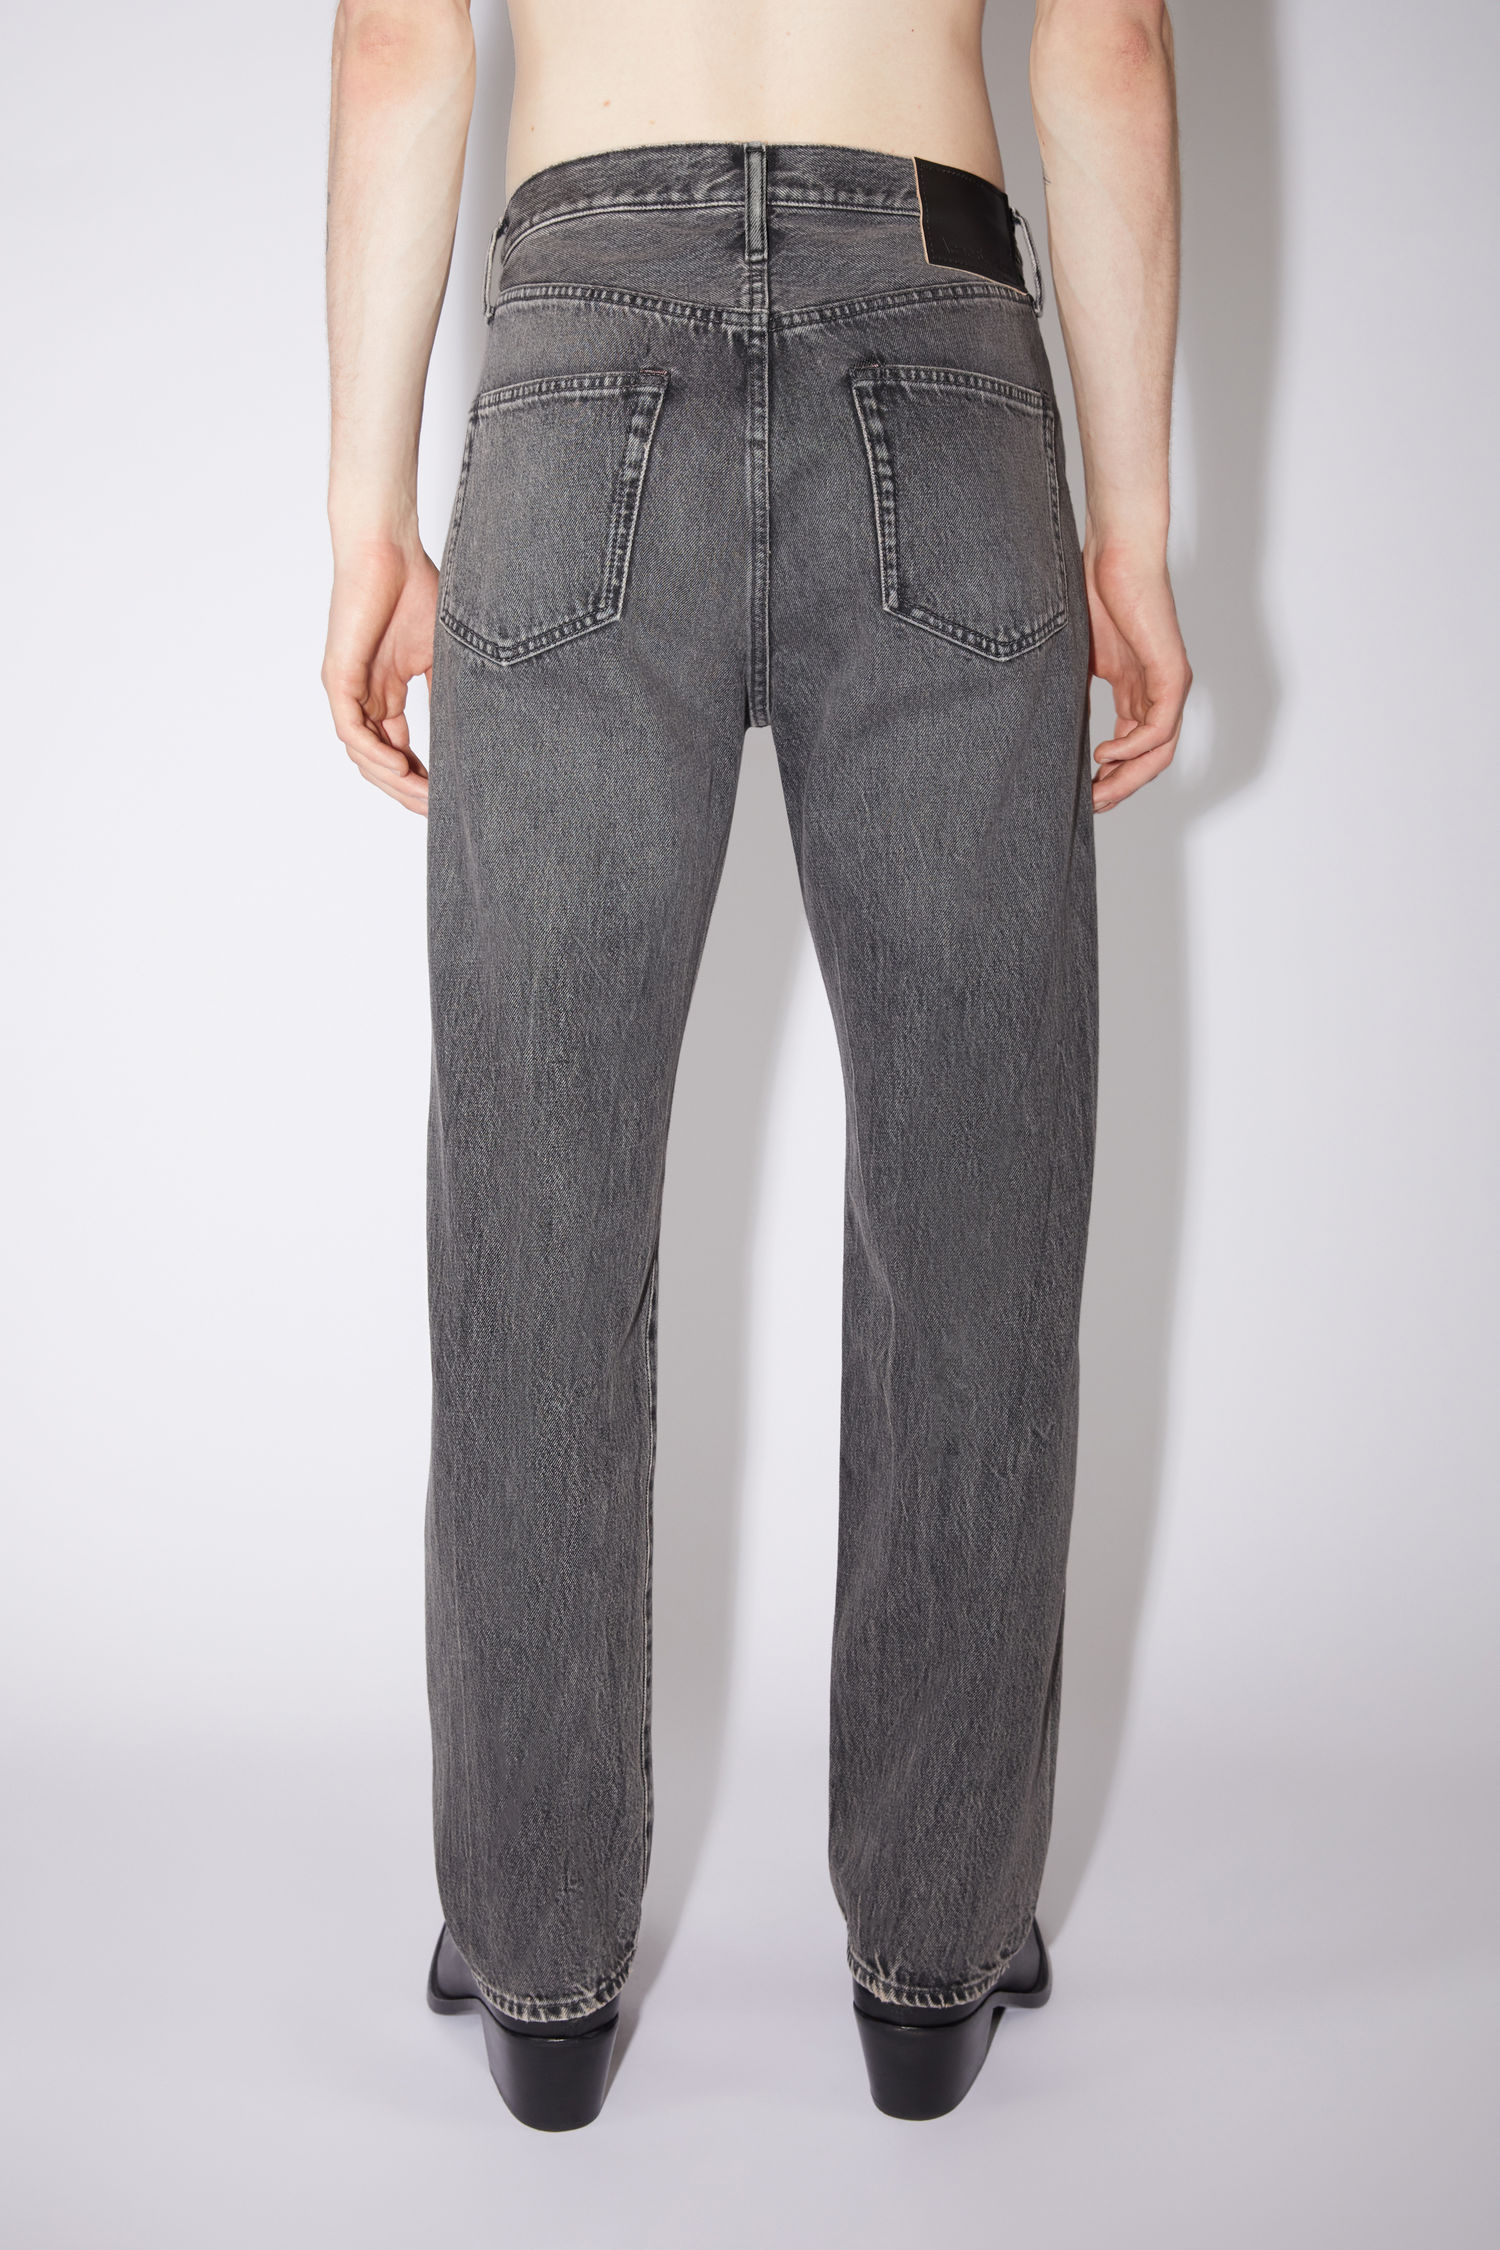 Acne Studios Denim 2003 Vintage Relaxed Fit Jeans 2003 in Black Womens Clothing Jeans Straight-leg jeans 